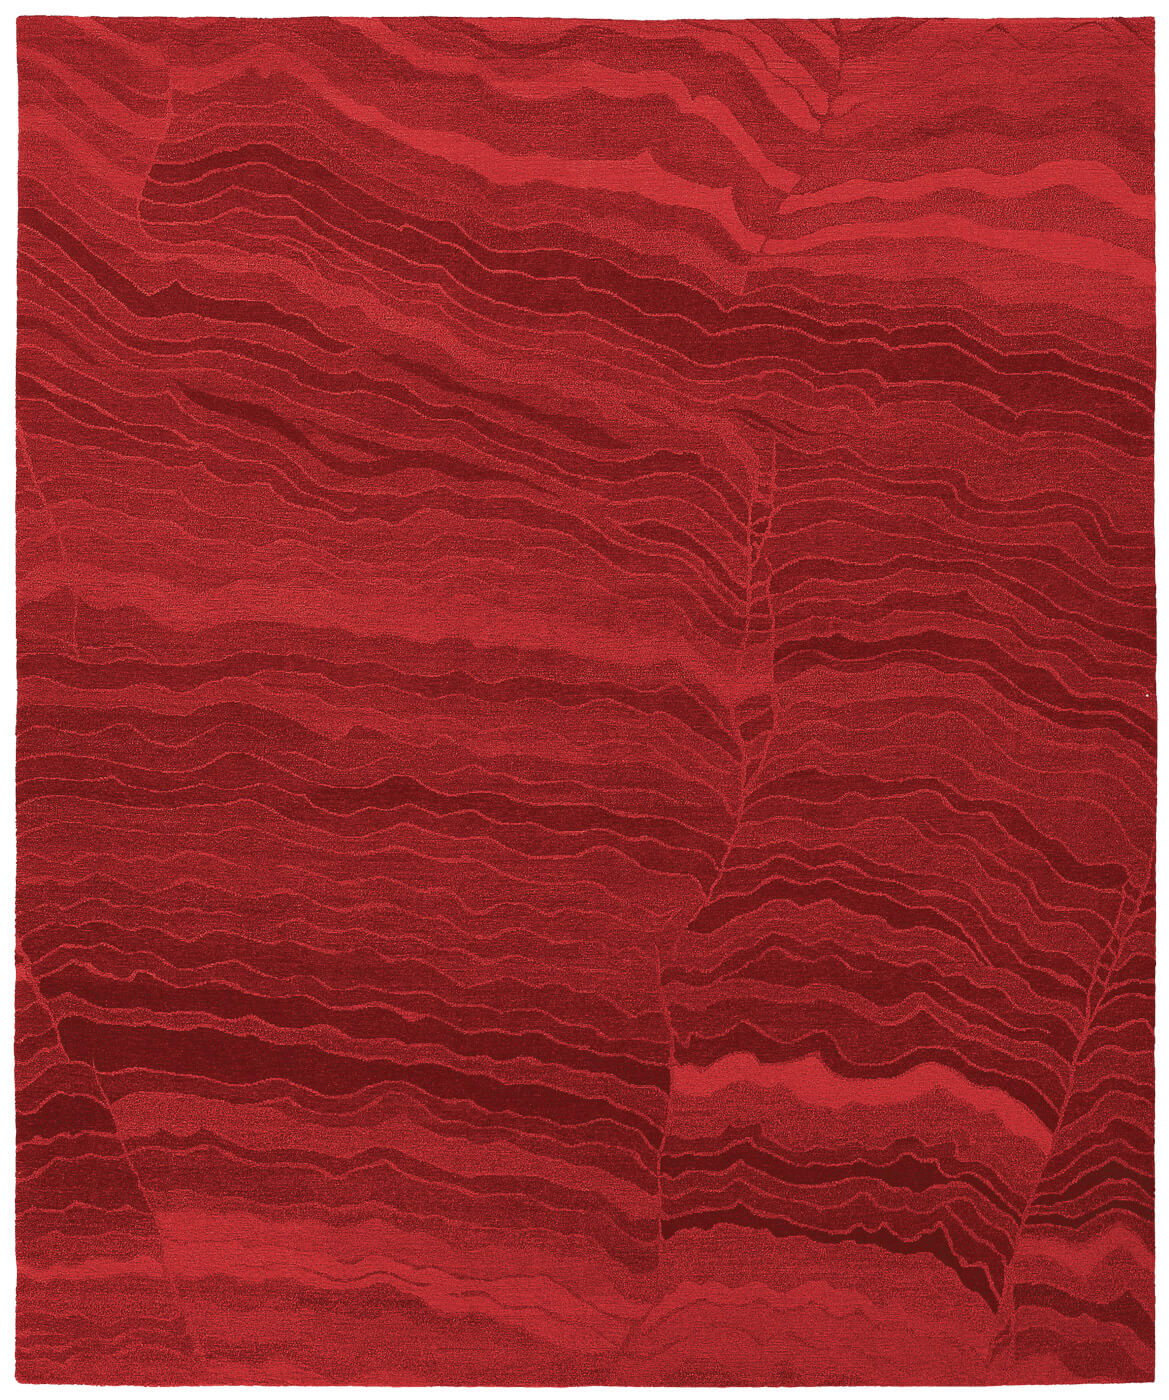 Hand-woven Wool Red Luxury Rug ☞ Size: 300 x 400 cm